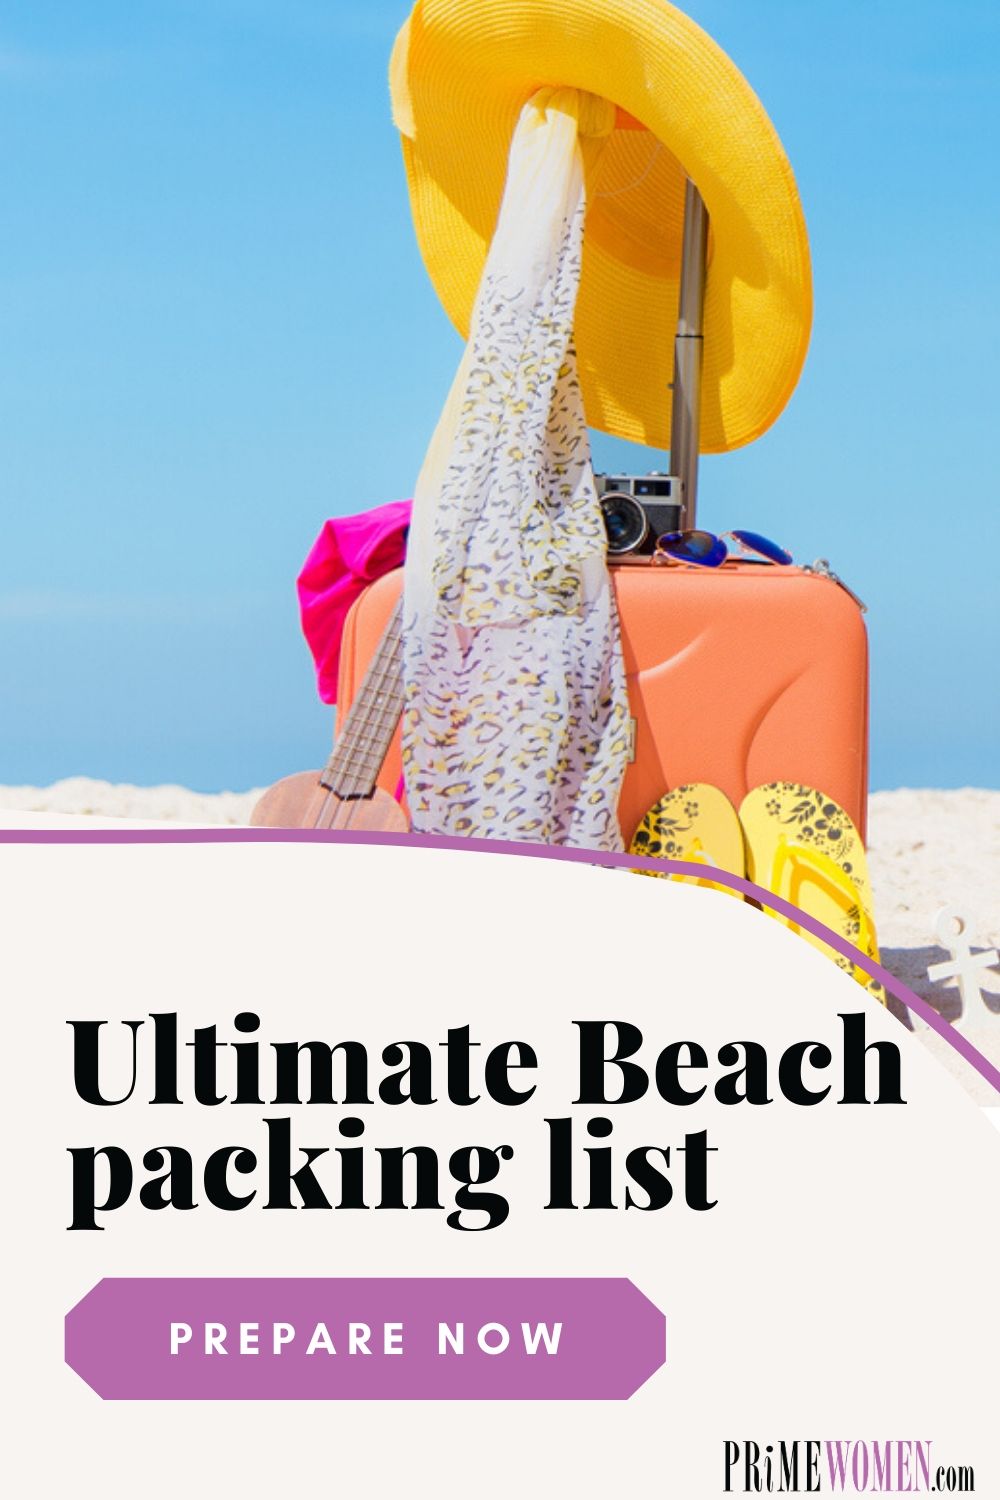 The Ultimate Beach packing list